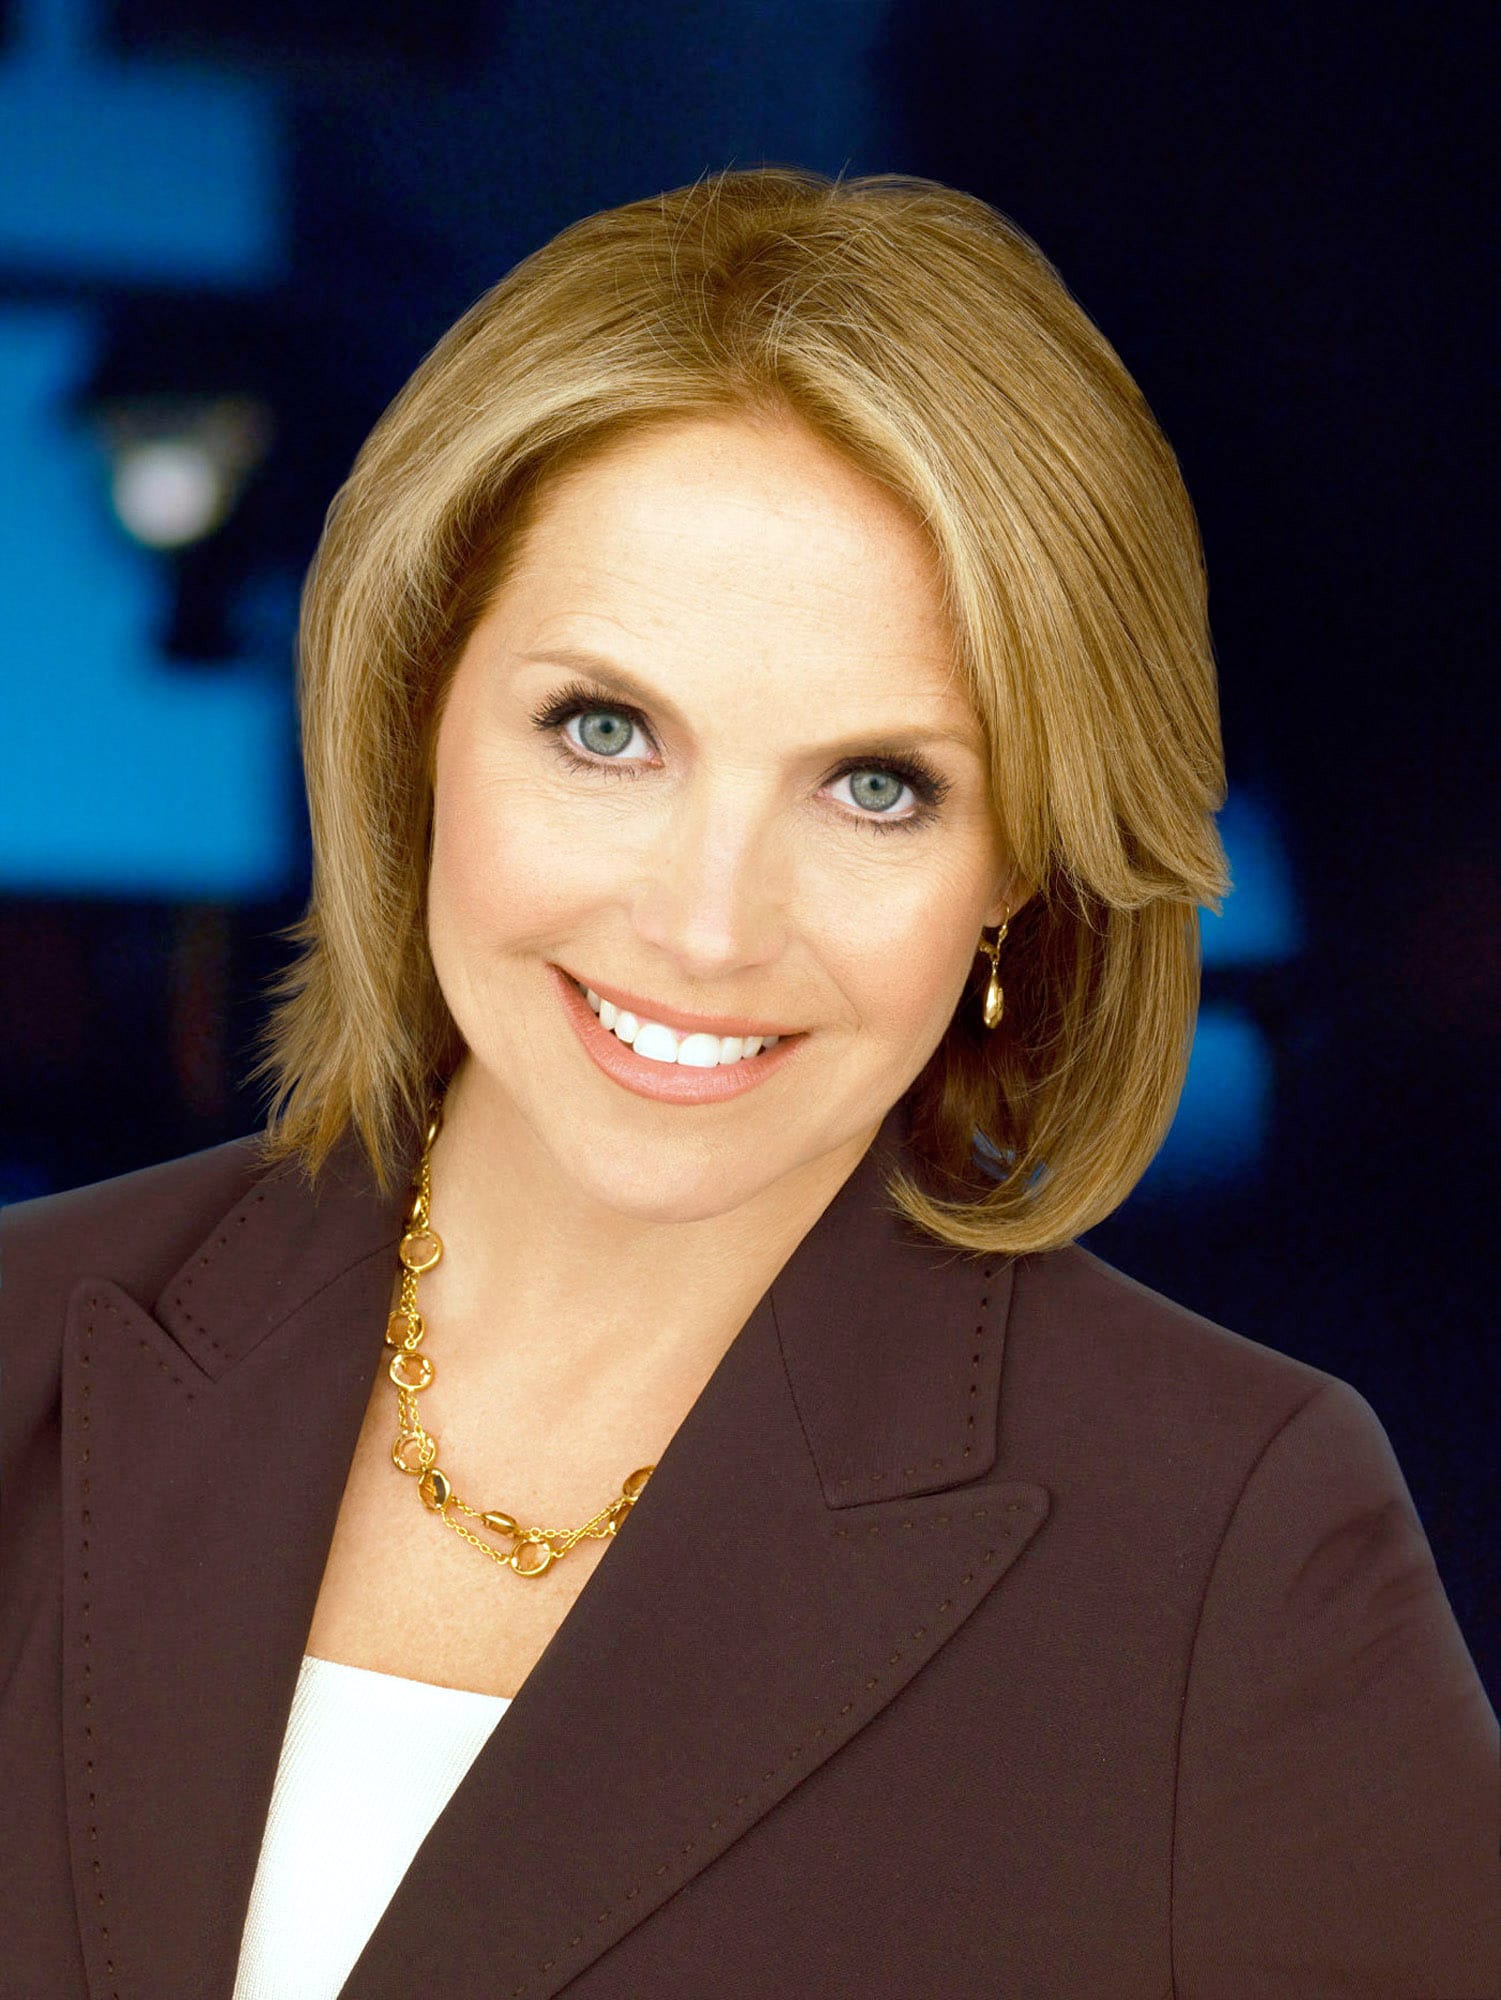 CBS EVENING NEWS WITH KATIE COURIC, Katie Couric,